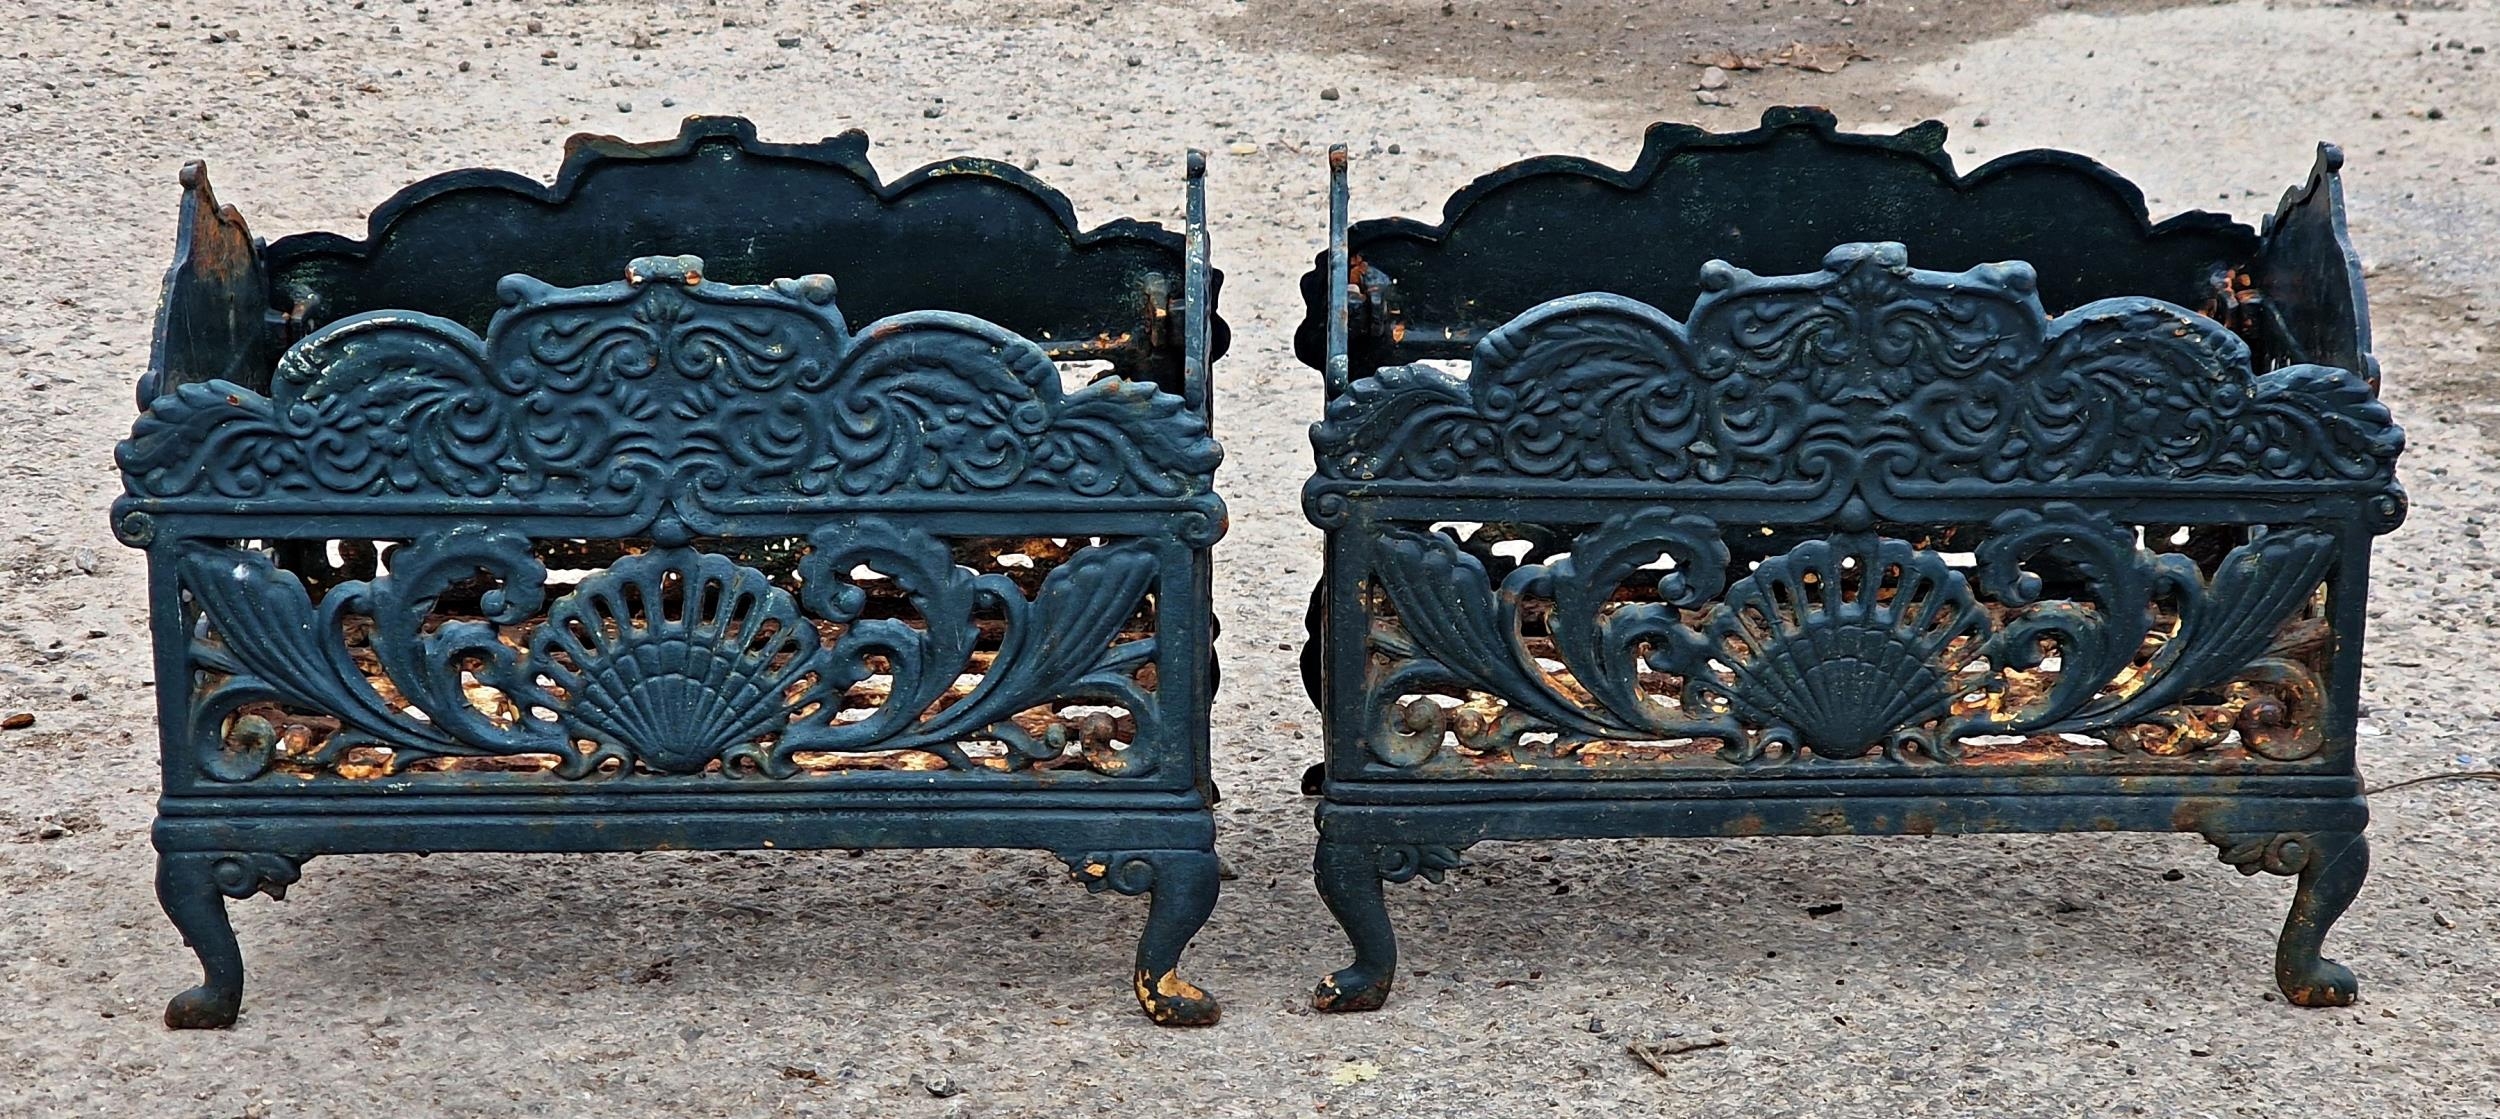 Pair of painted Victorian style cast iron plant stands with pierced scrolling detail, H 28cm x W